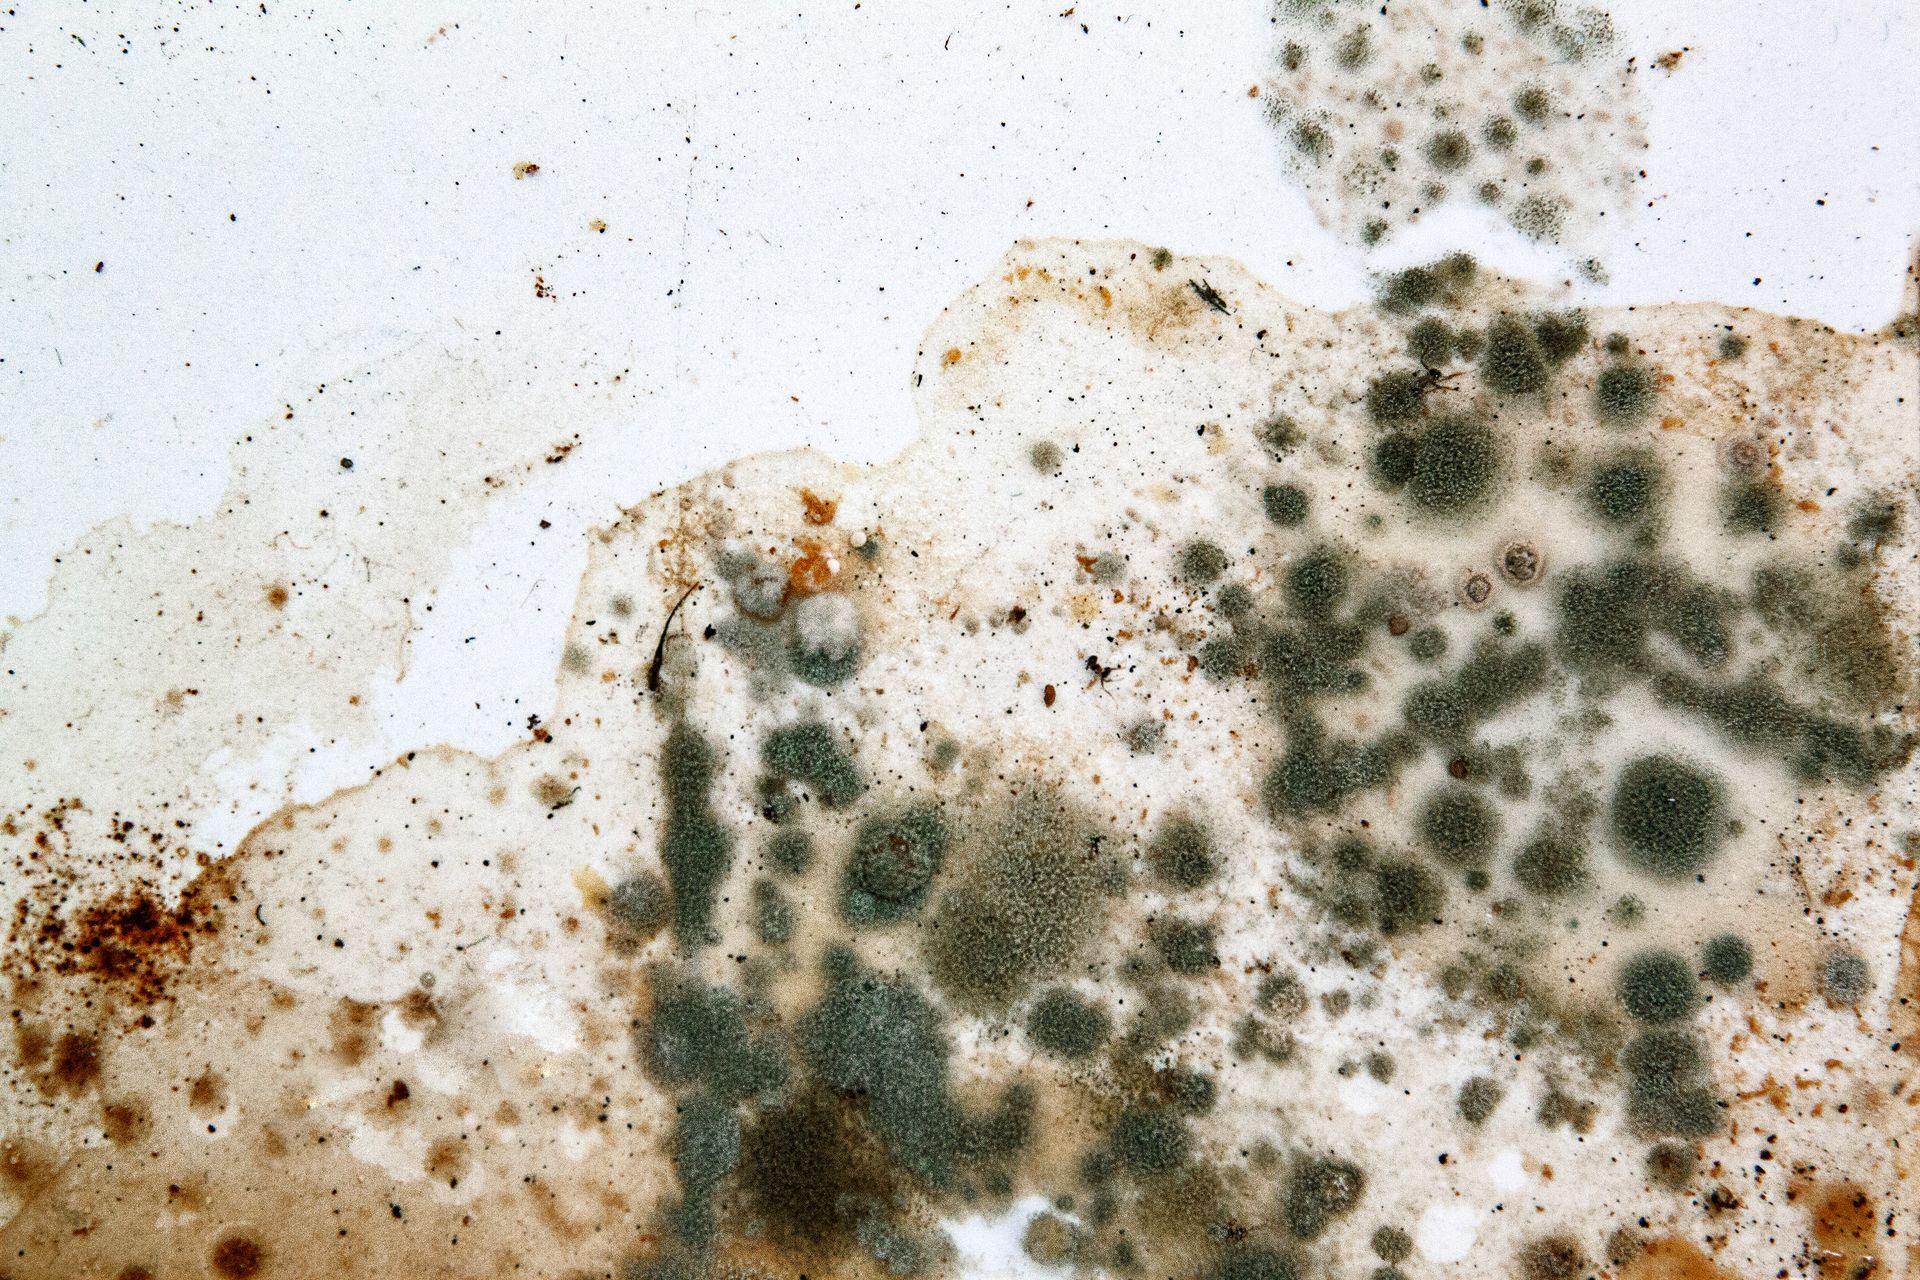 A close up of a white surface with black mold growing on it.